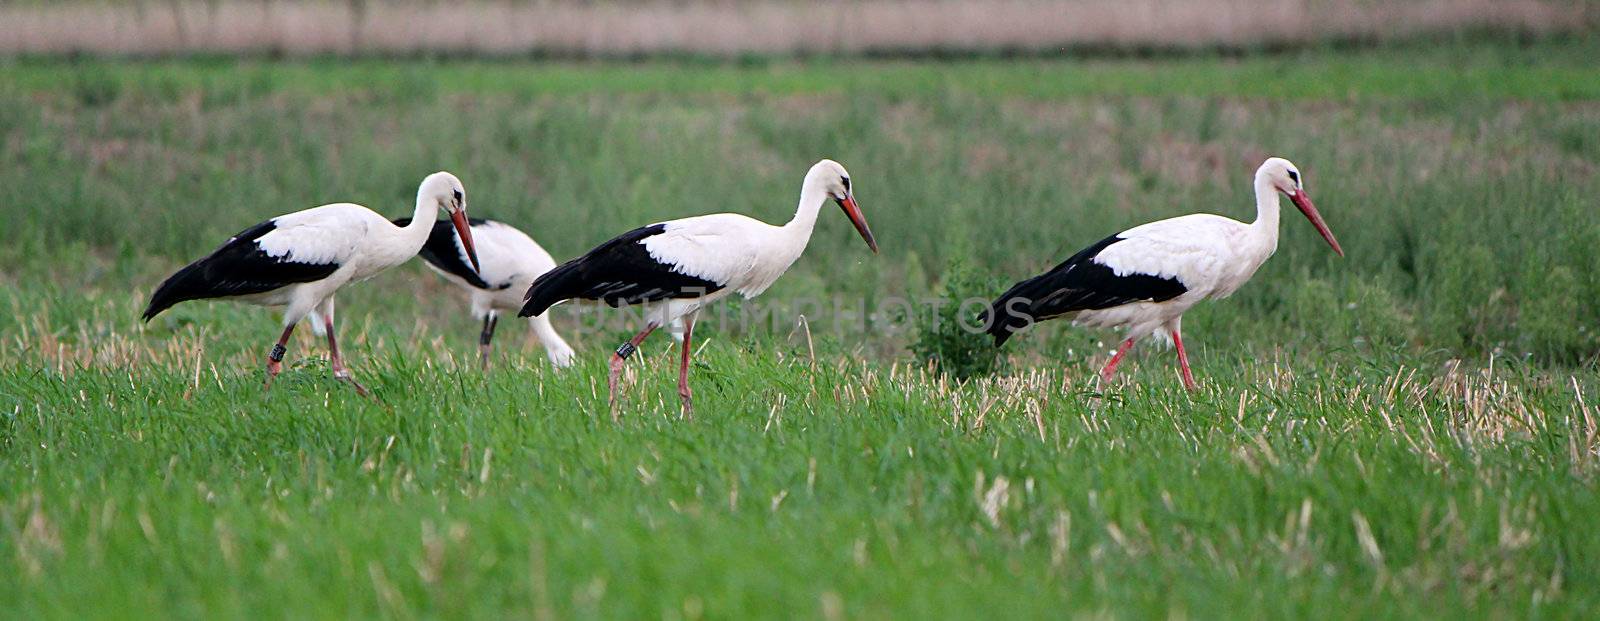 Four storks walking together in a field